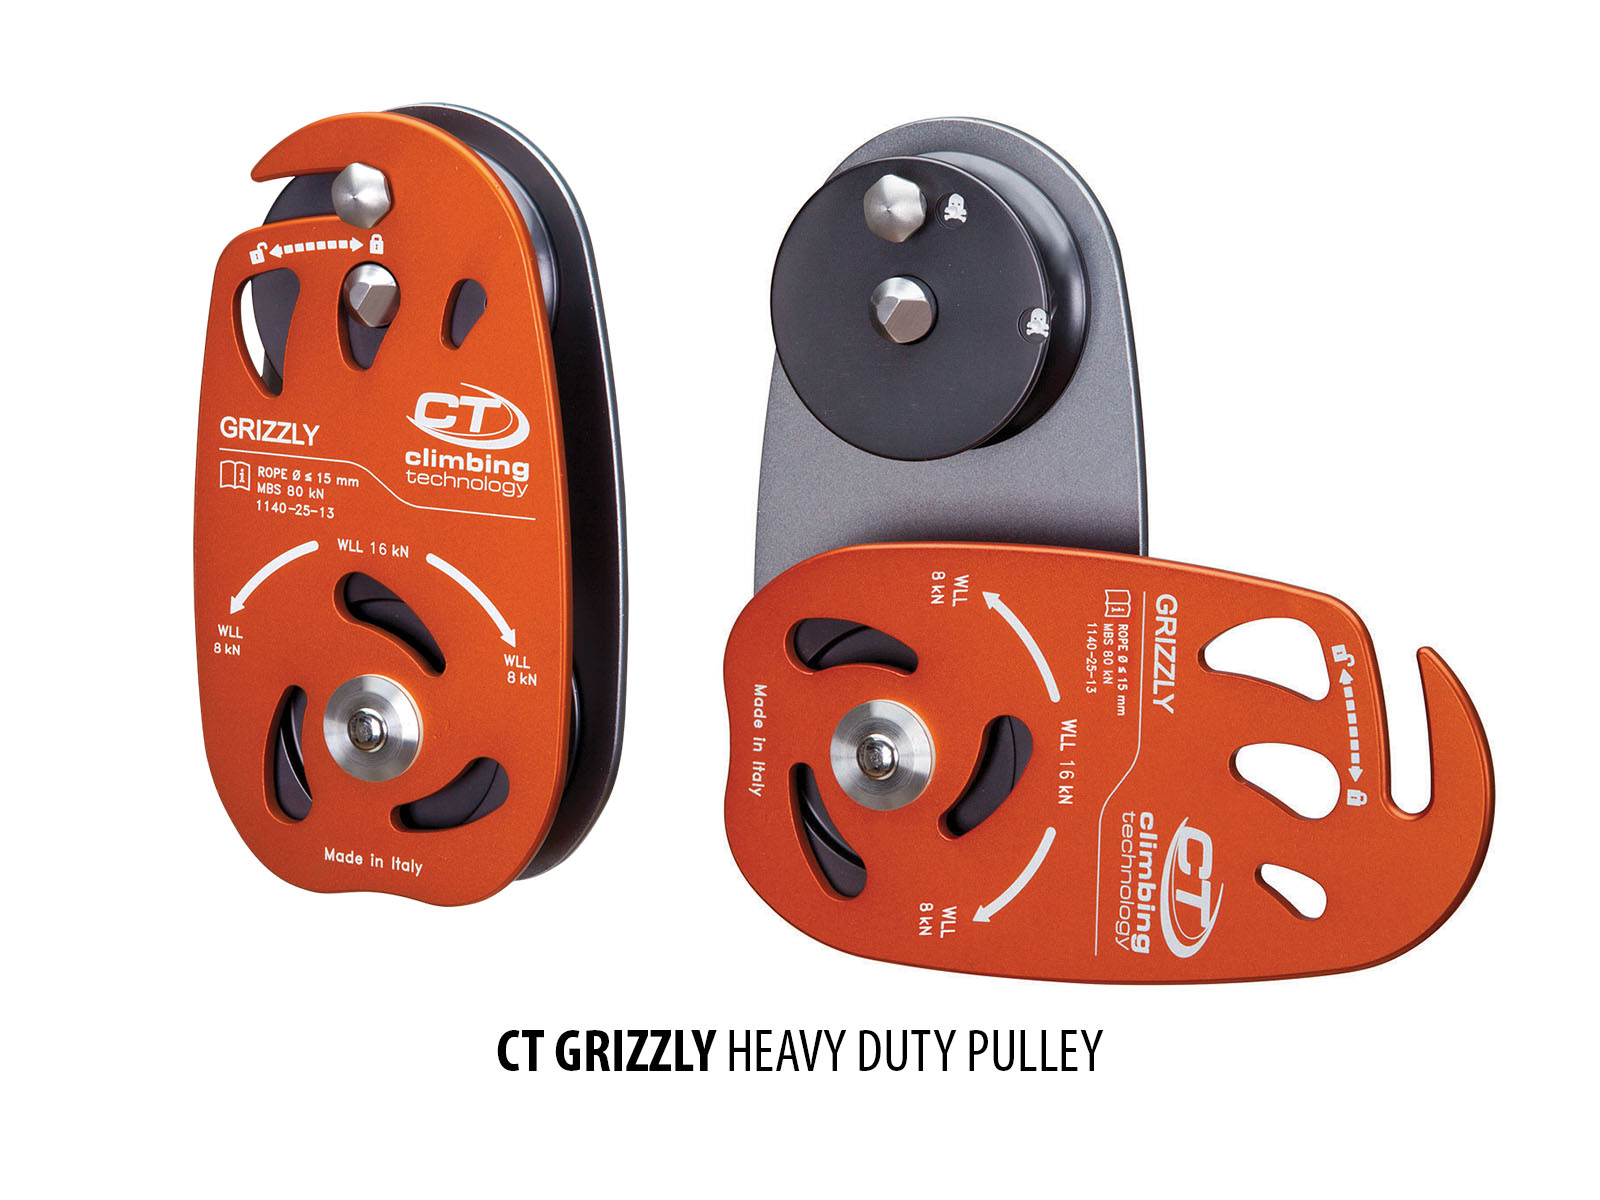 CT Grizzly Heavy Duty Pulley